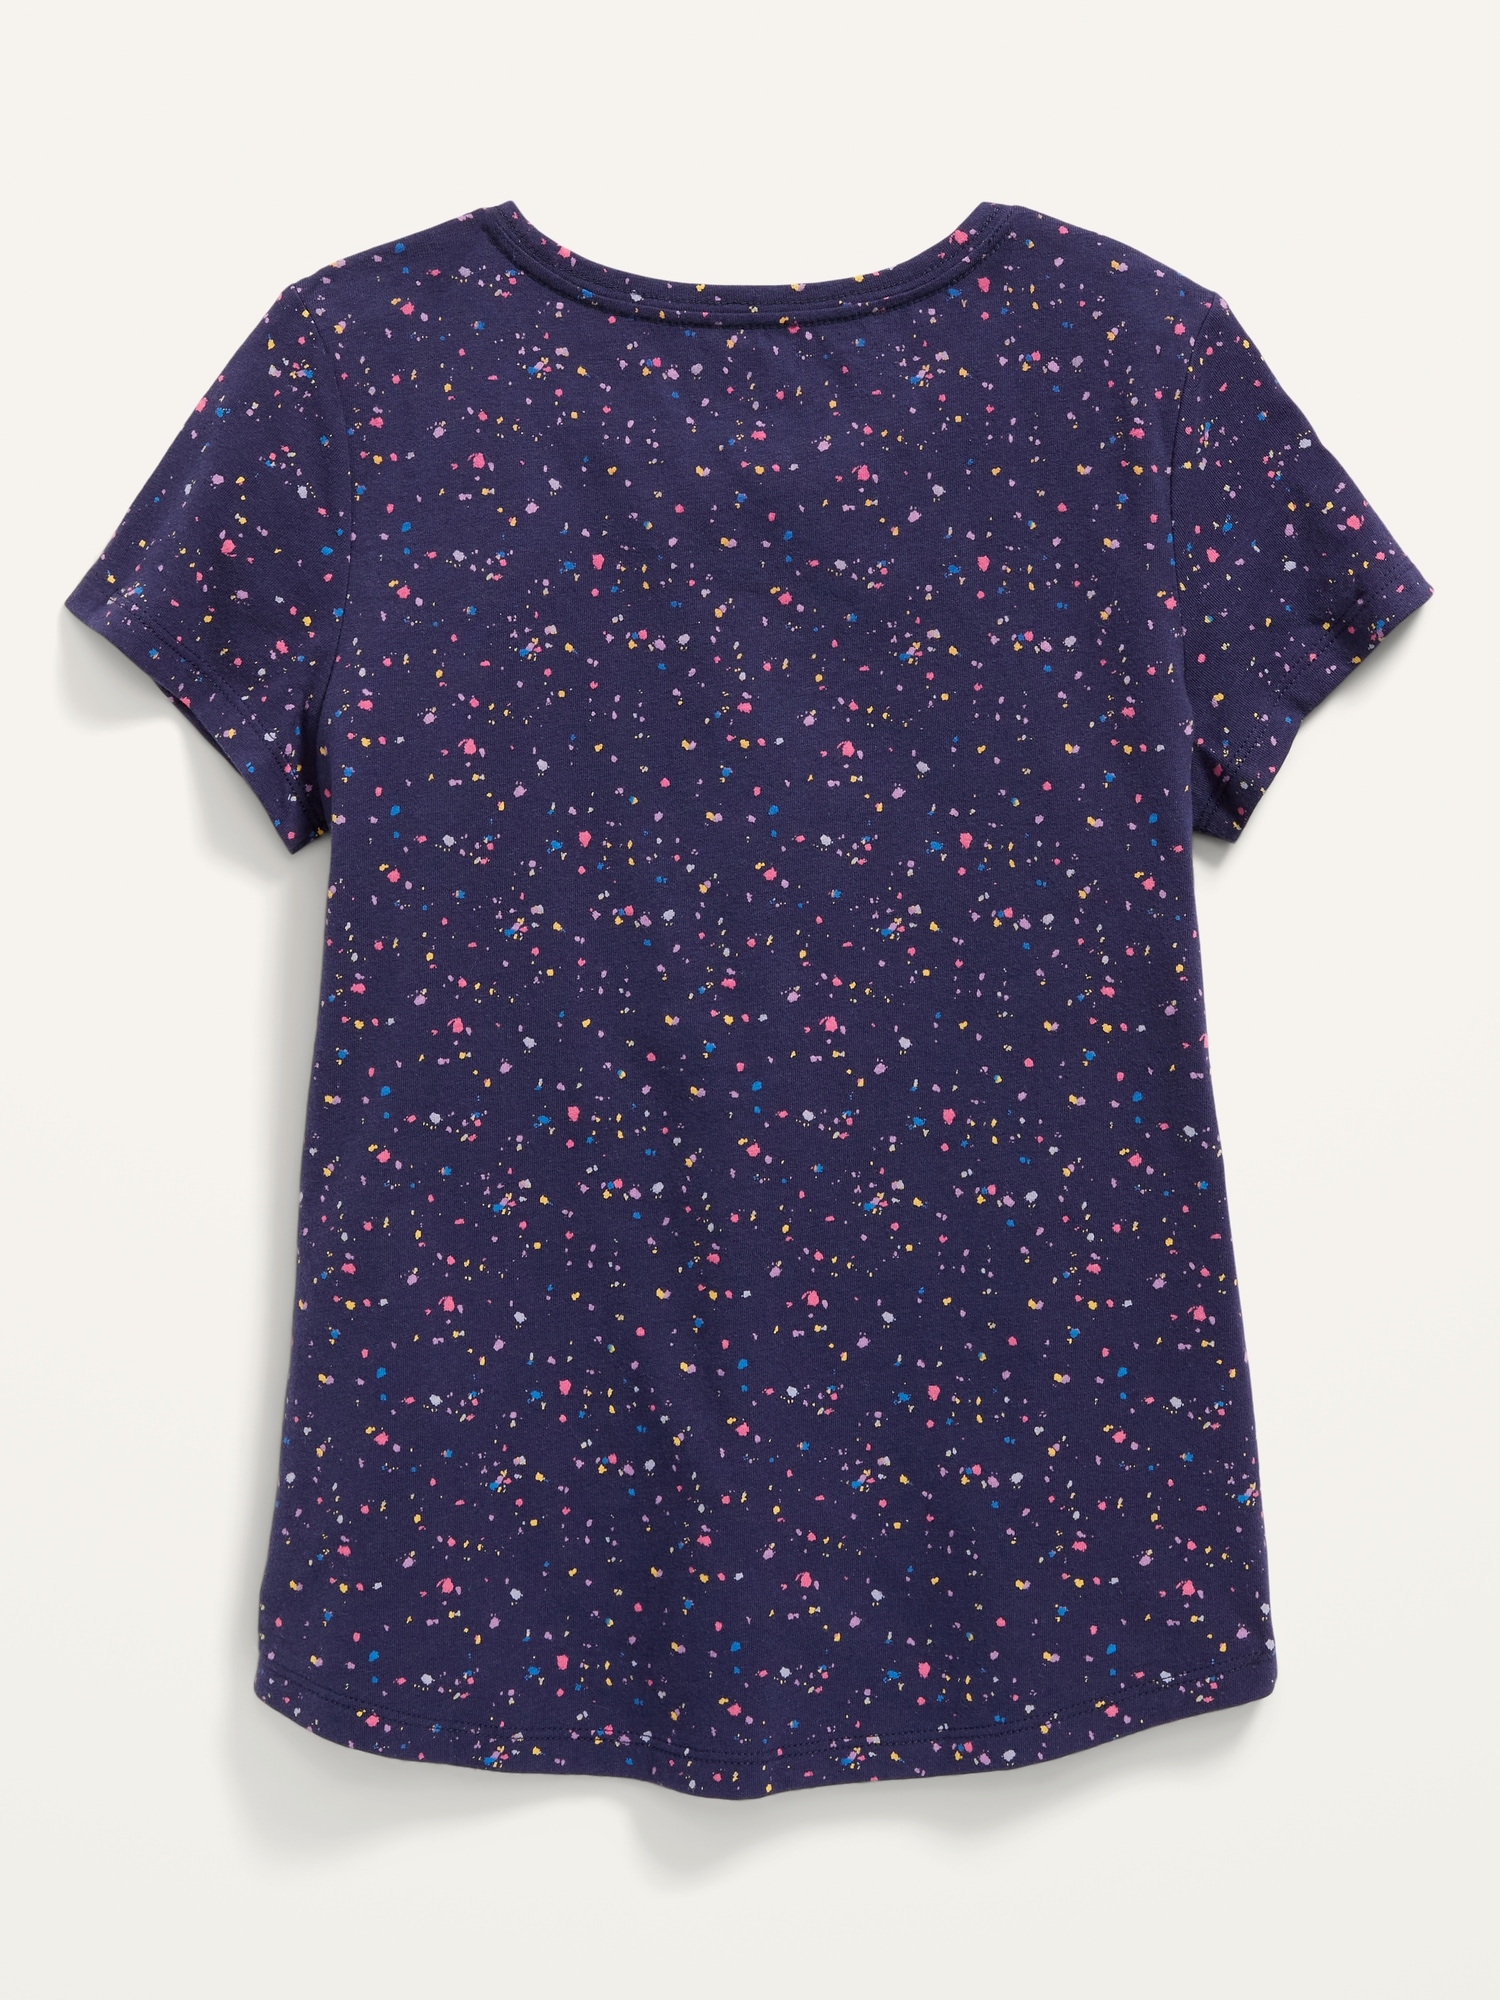 Softest Printed Scoop-Neck T-Shirt for Girls | Old Navy